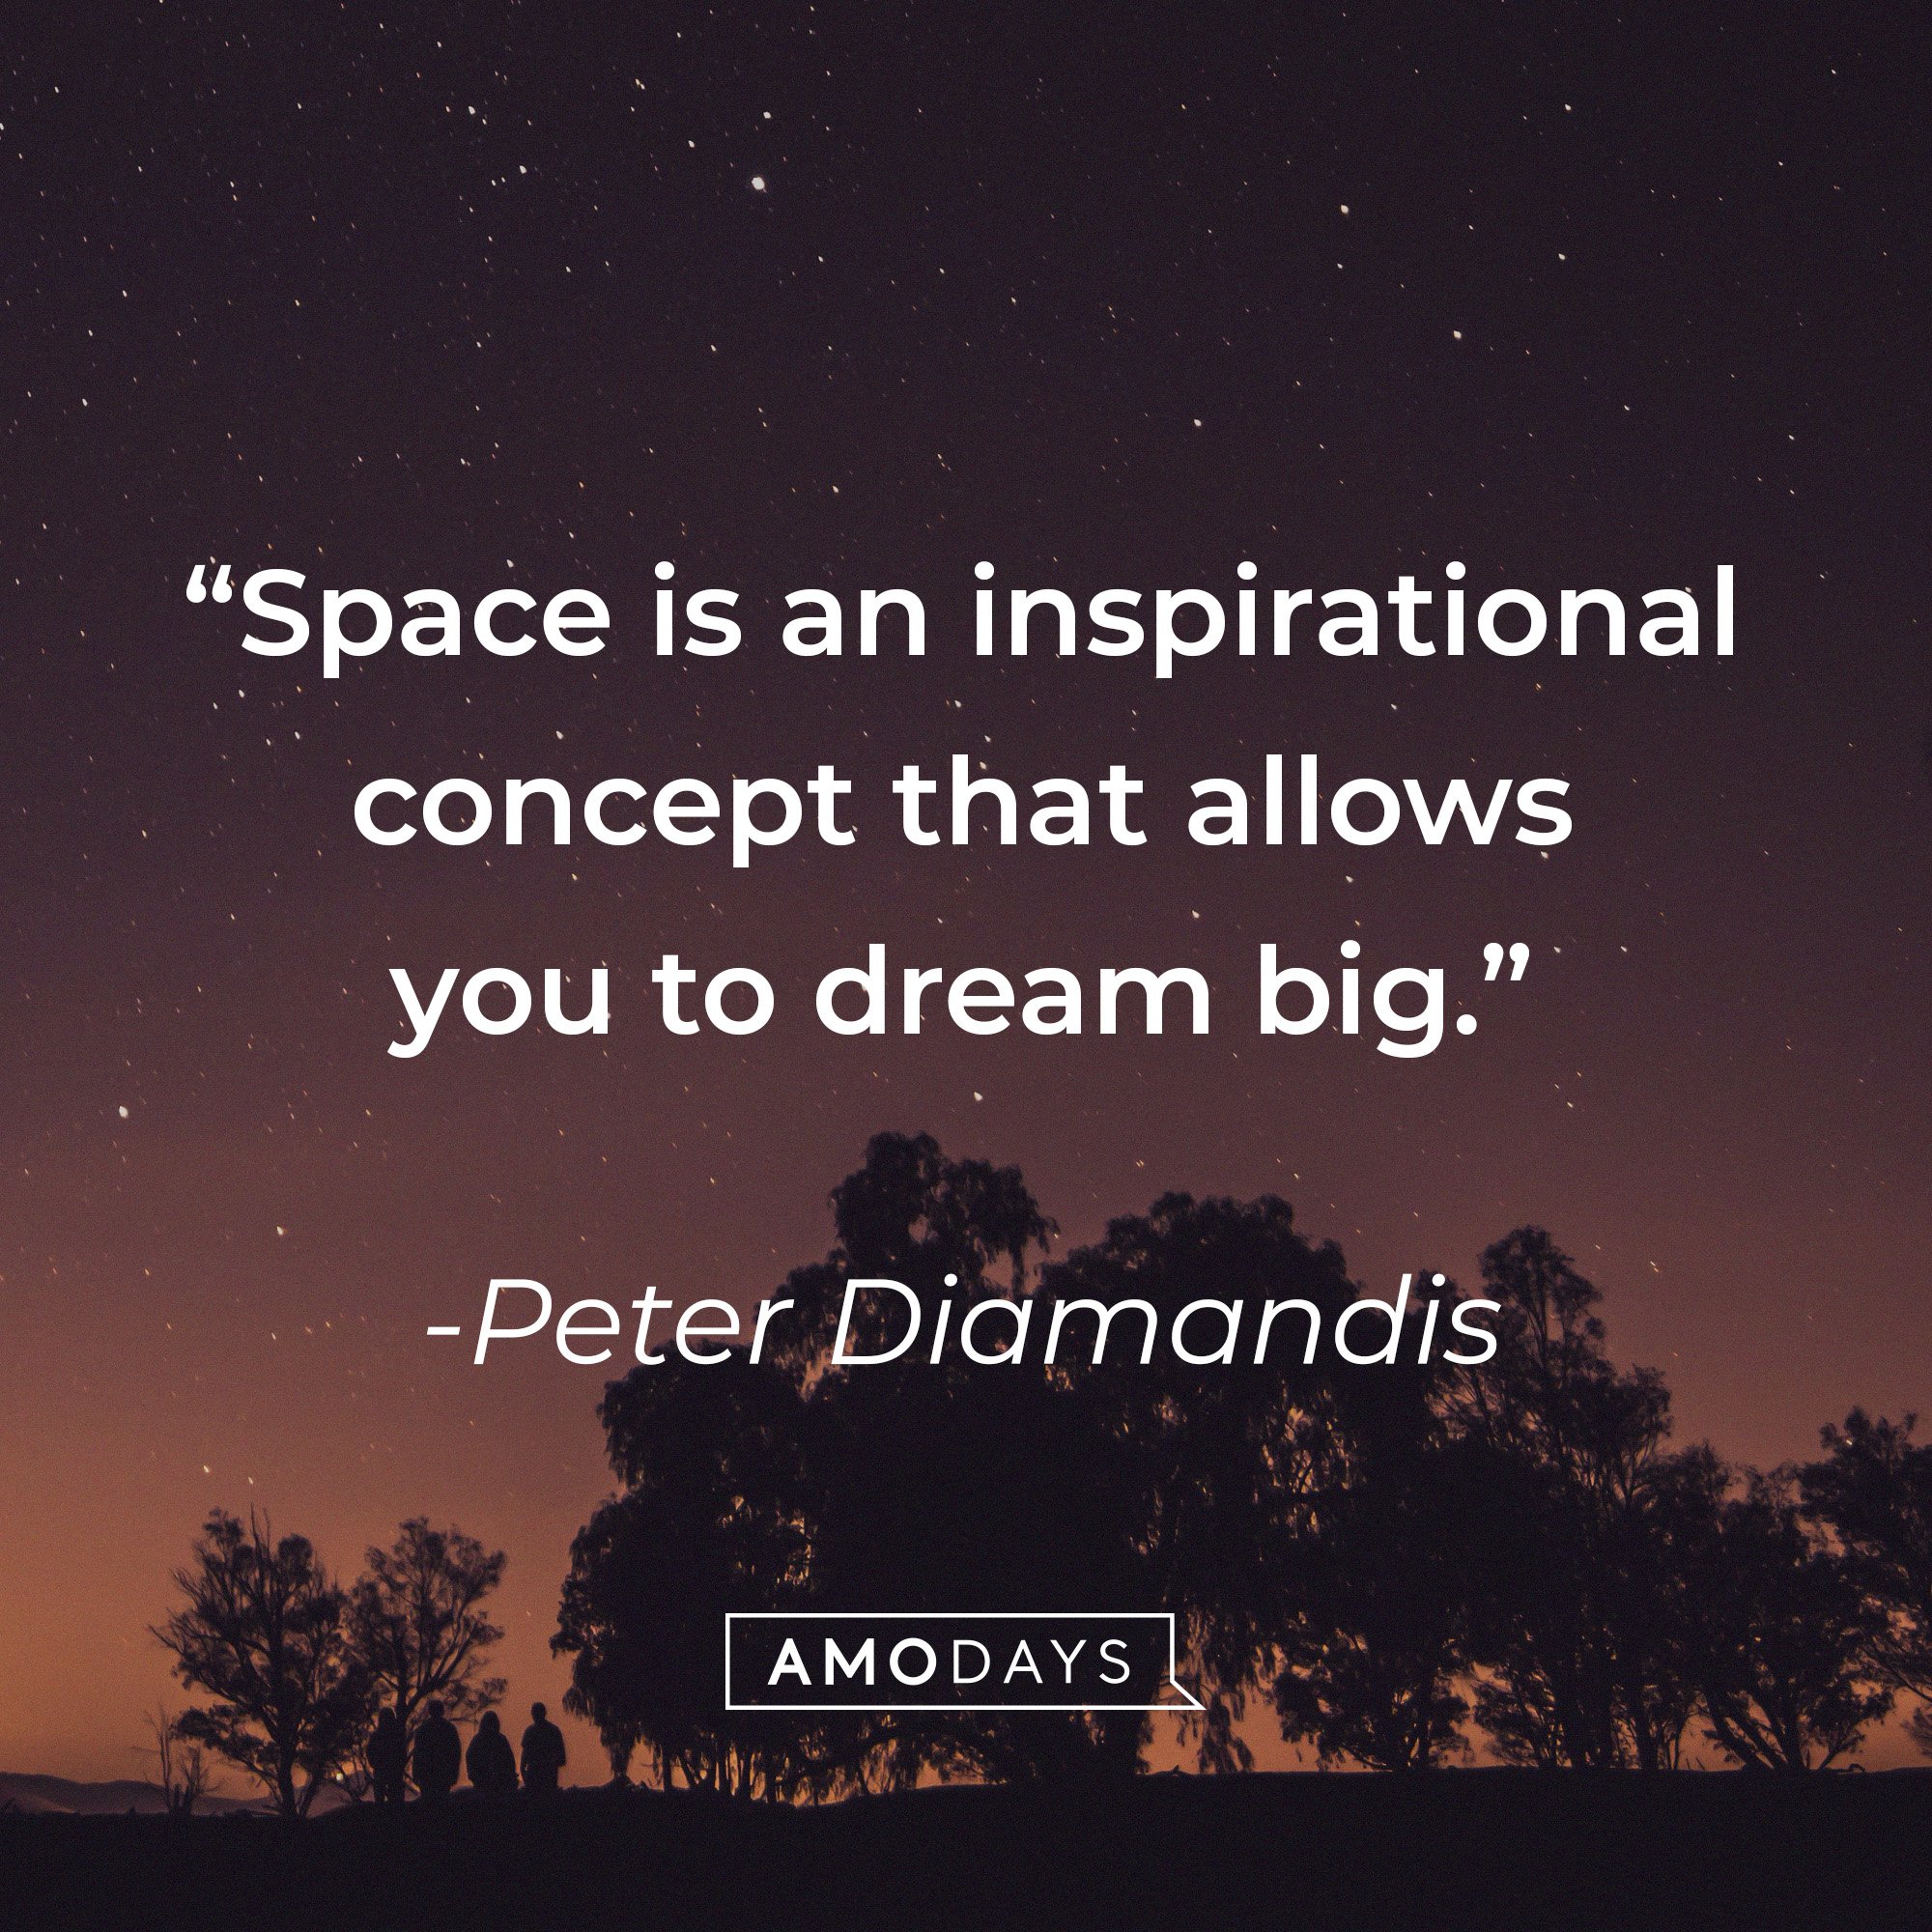 Peter Diamandis’ quote: “Space is an inspirational concept that allows you to dream big.” | Image: AmoDays